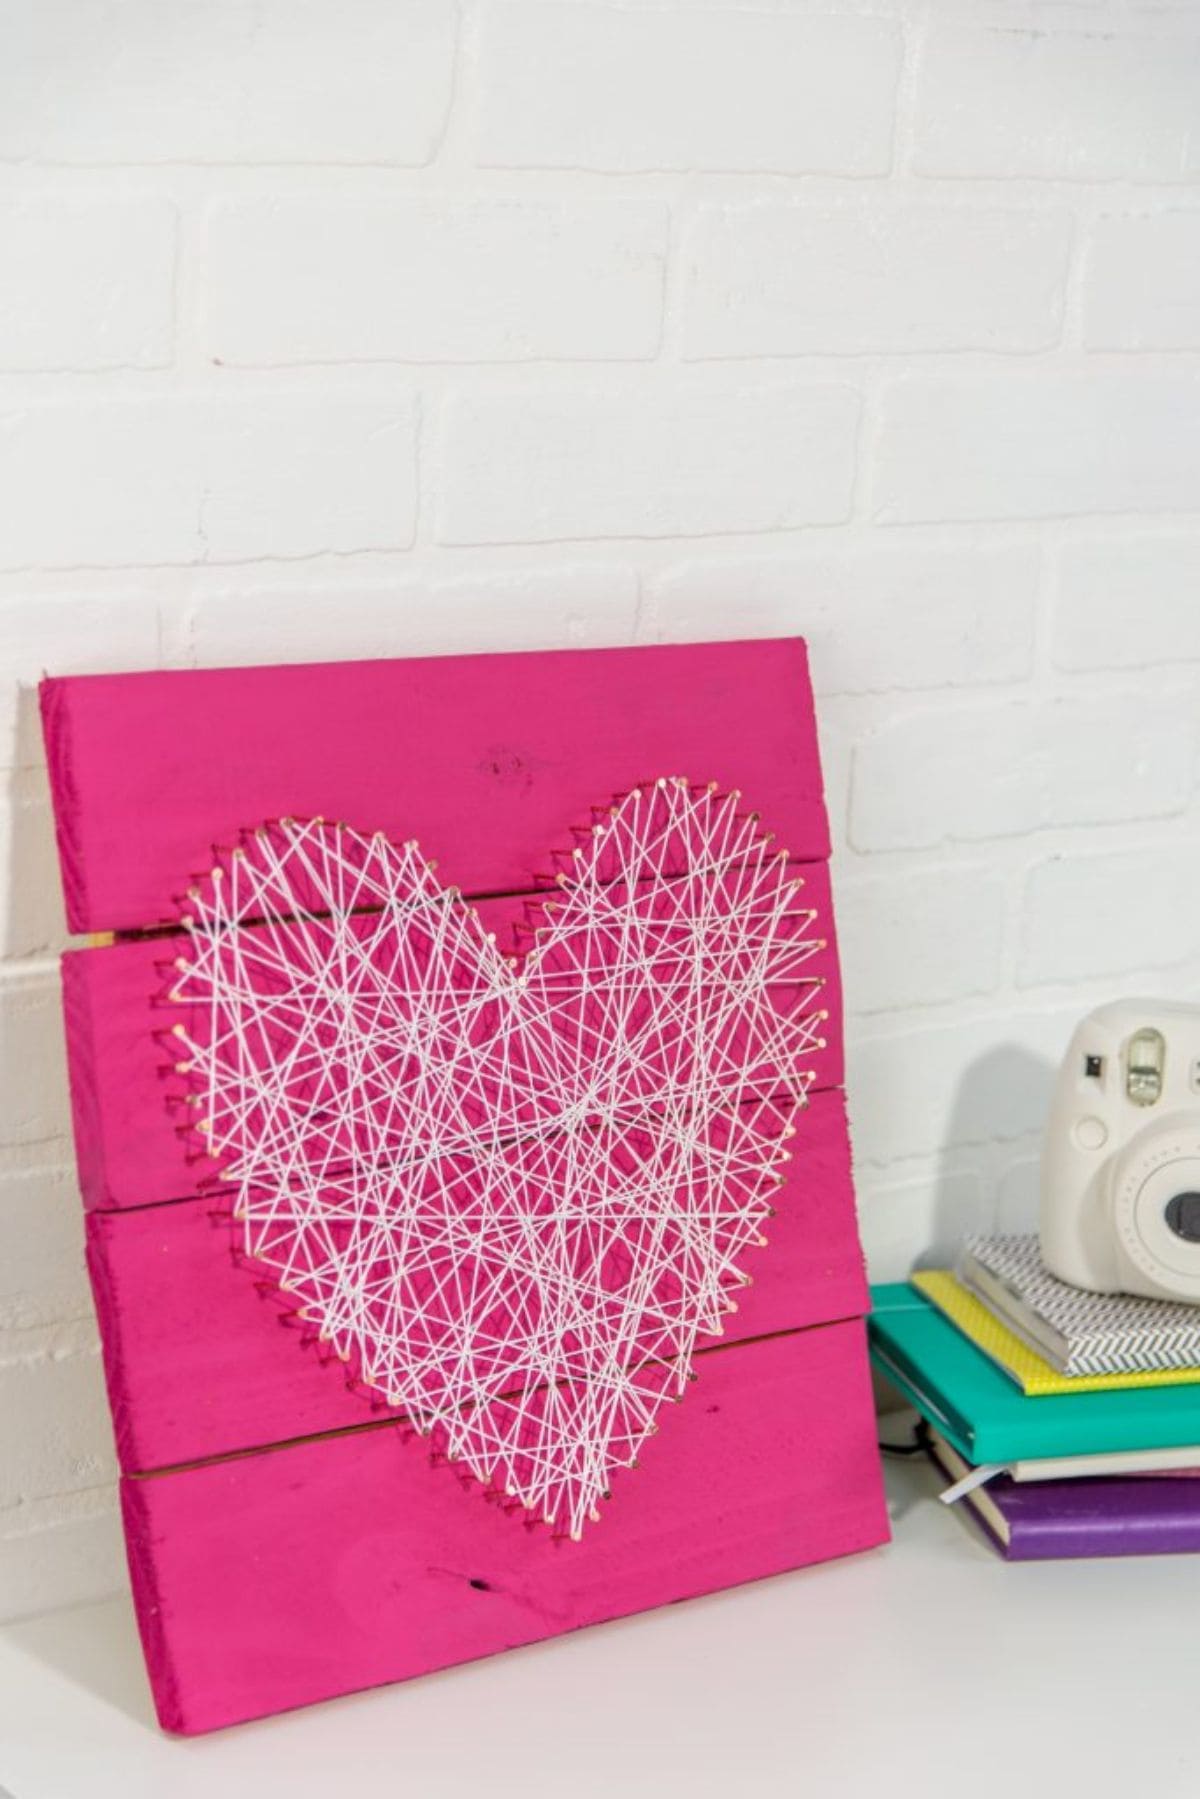 Resting up against a cream wall is a pink wooden board. On the front of it is a heart made from string and nails in white.